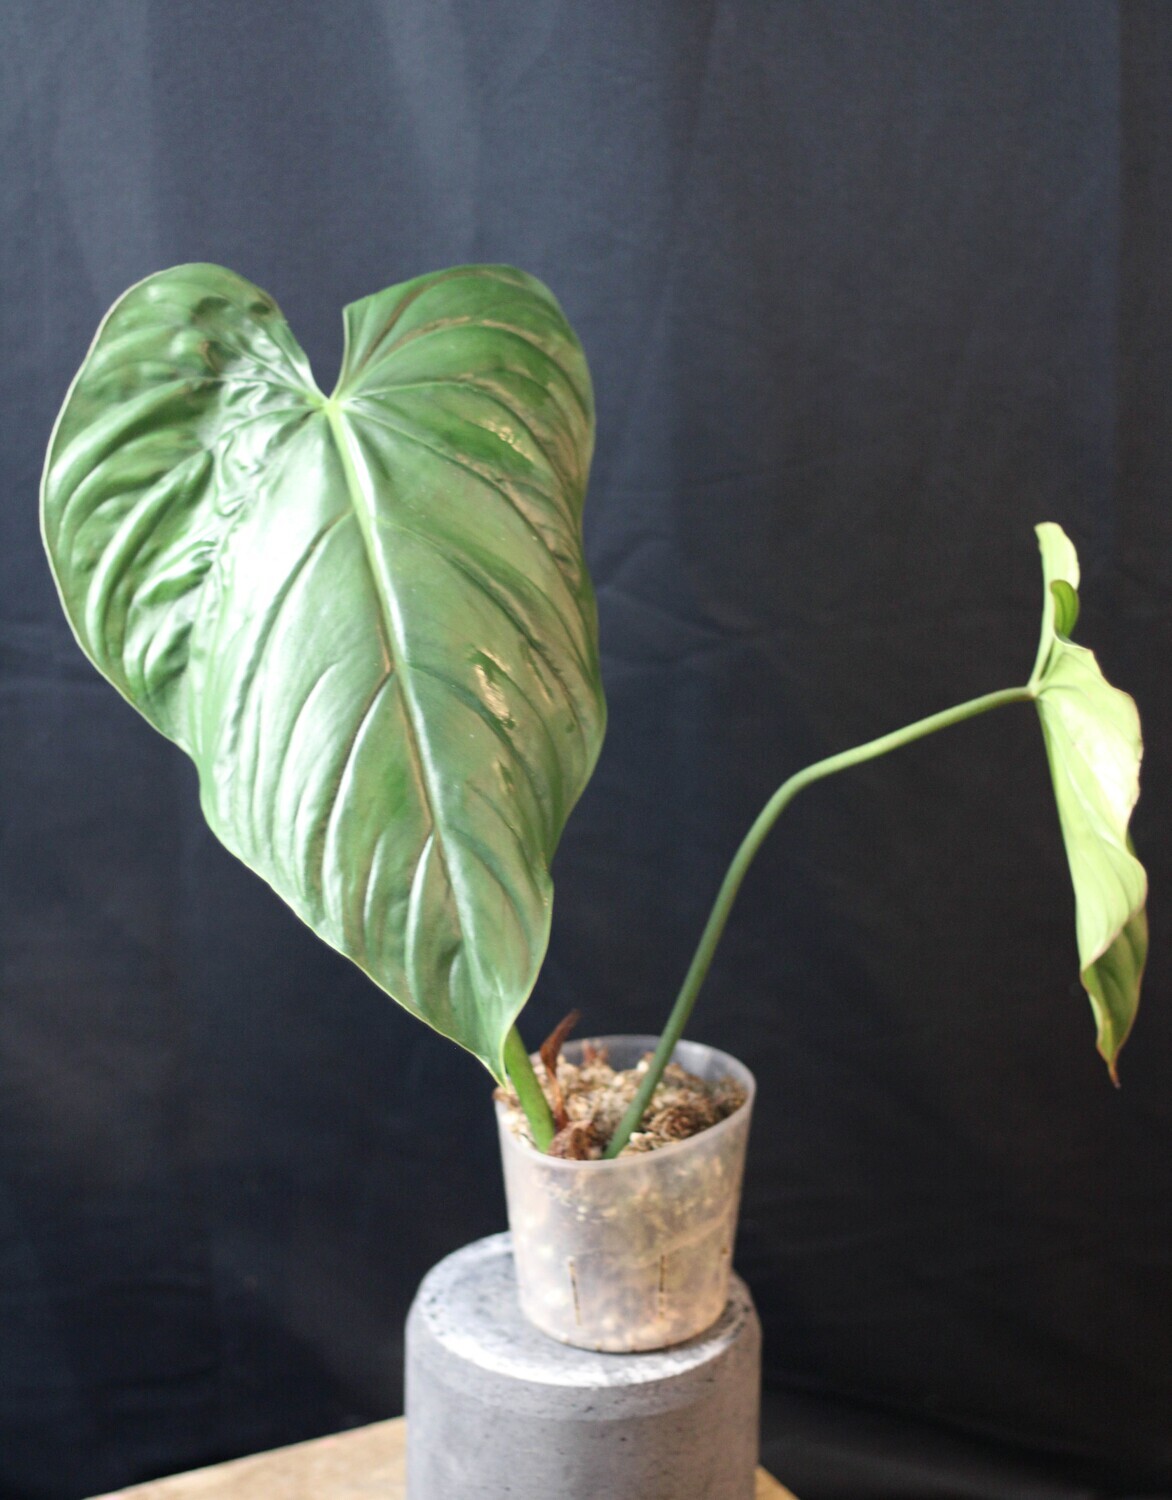 Philodendron sp. Colombia "Platinum" - A